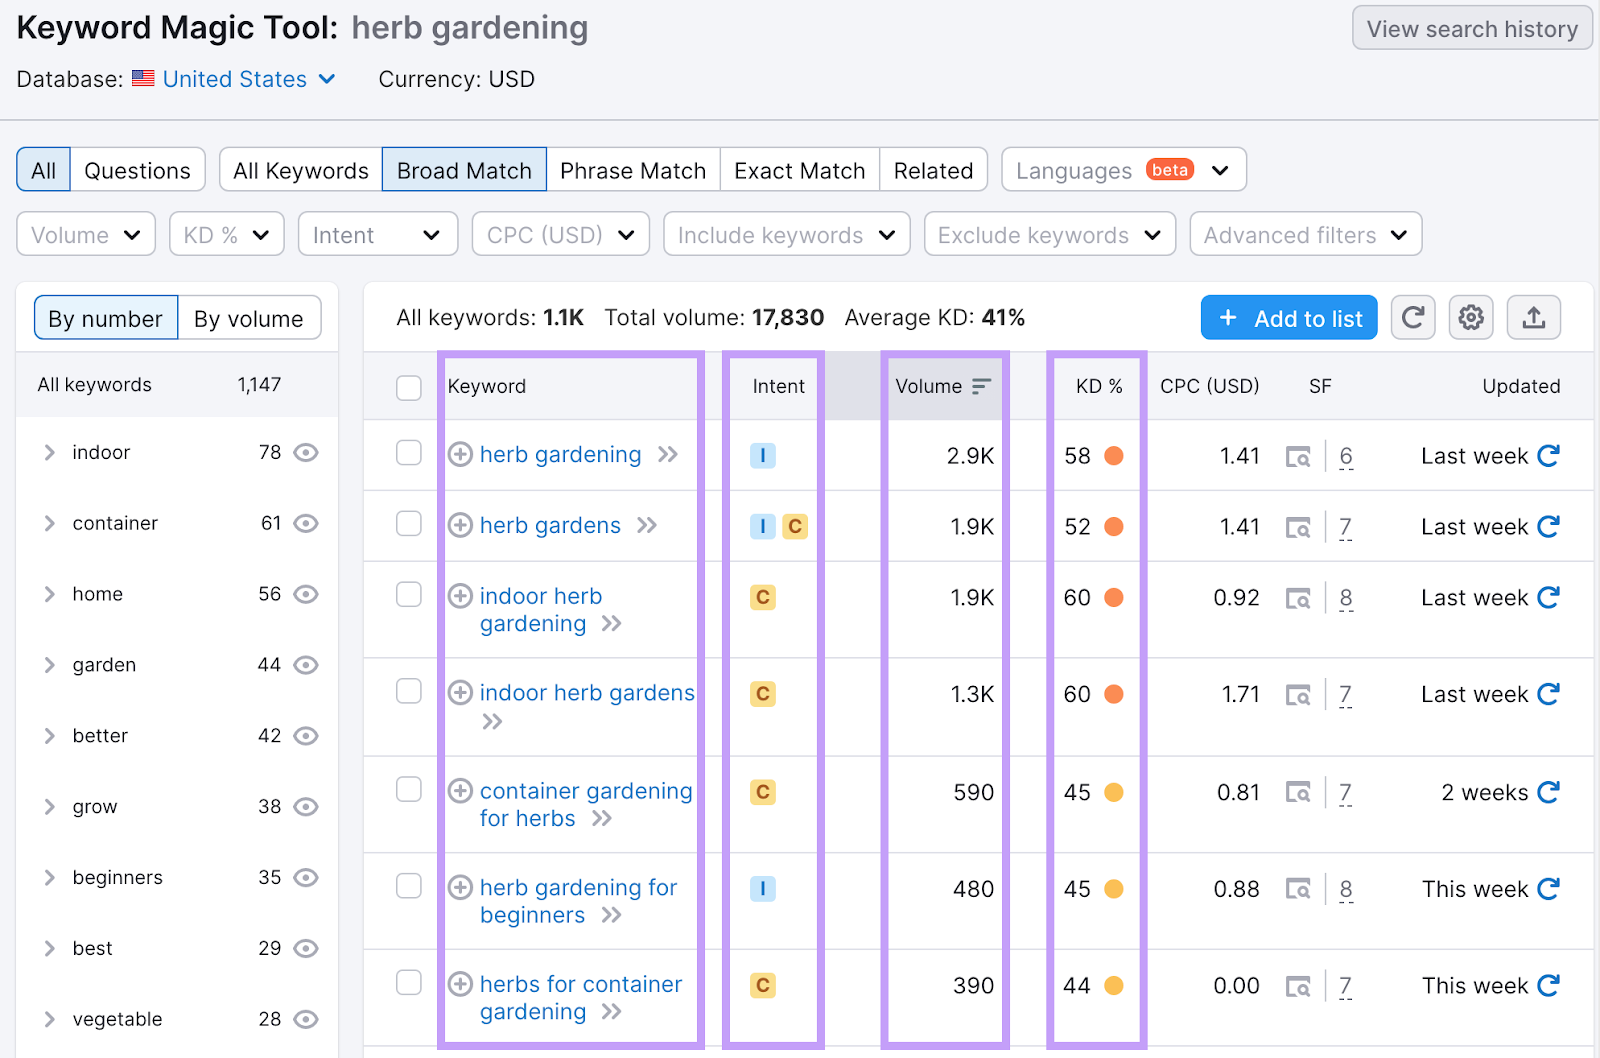 “Intent,” “Volume,” and “KD%" columns highlighted successful  Keyword Magic Tool